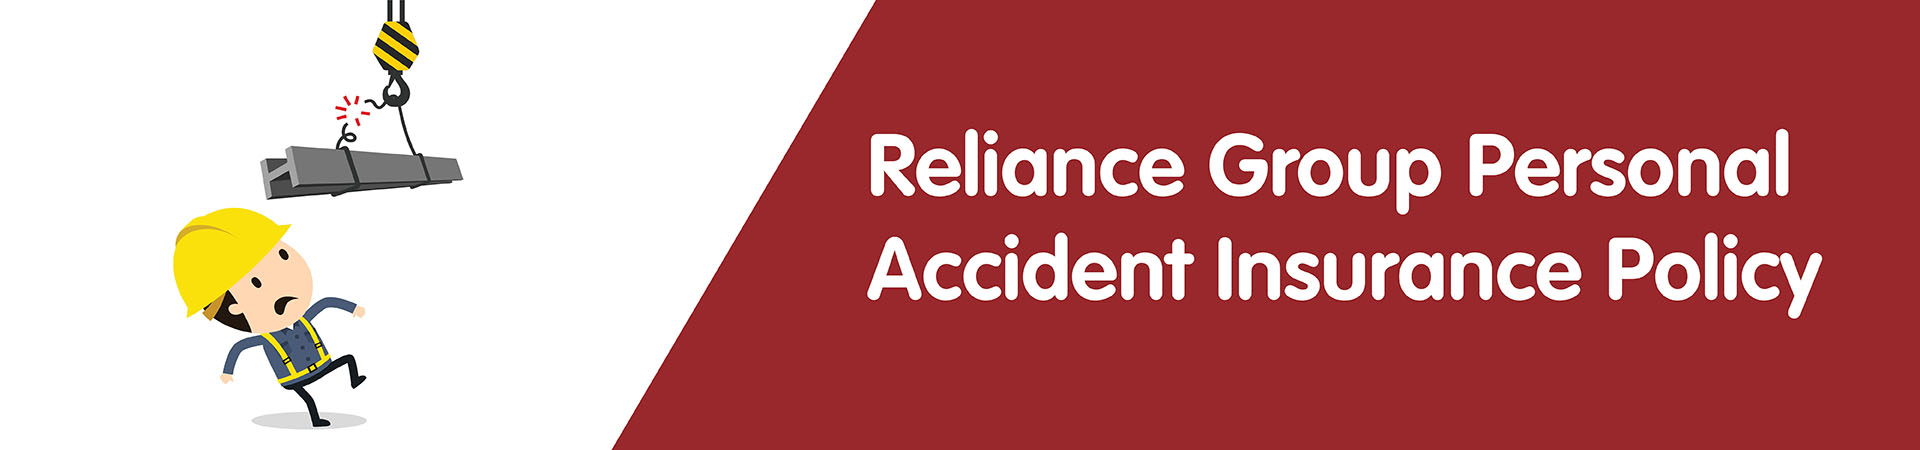 IndusInd Bank -  Reliance Group Personal Accident Insurance Policy